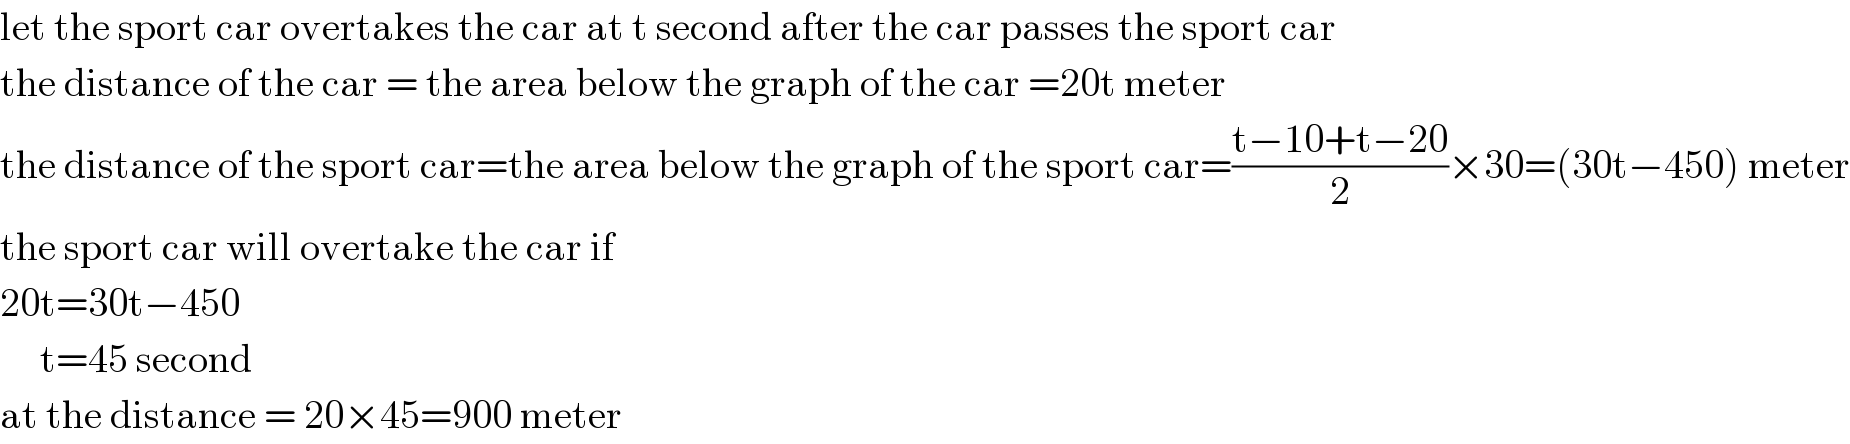 let the sport car overtakes the car at t second after the car passes the sport car  the distance of the car = the area below the graph of the car =20t meter  the distance of the sport car=the area below the graph of the sport car=((t−10+t−20)/2)×30=(30t−450) meter  the sport car will overtake the car if  20t=30t−450       t=45 second  at the distance = 20×45=900 meter  